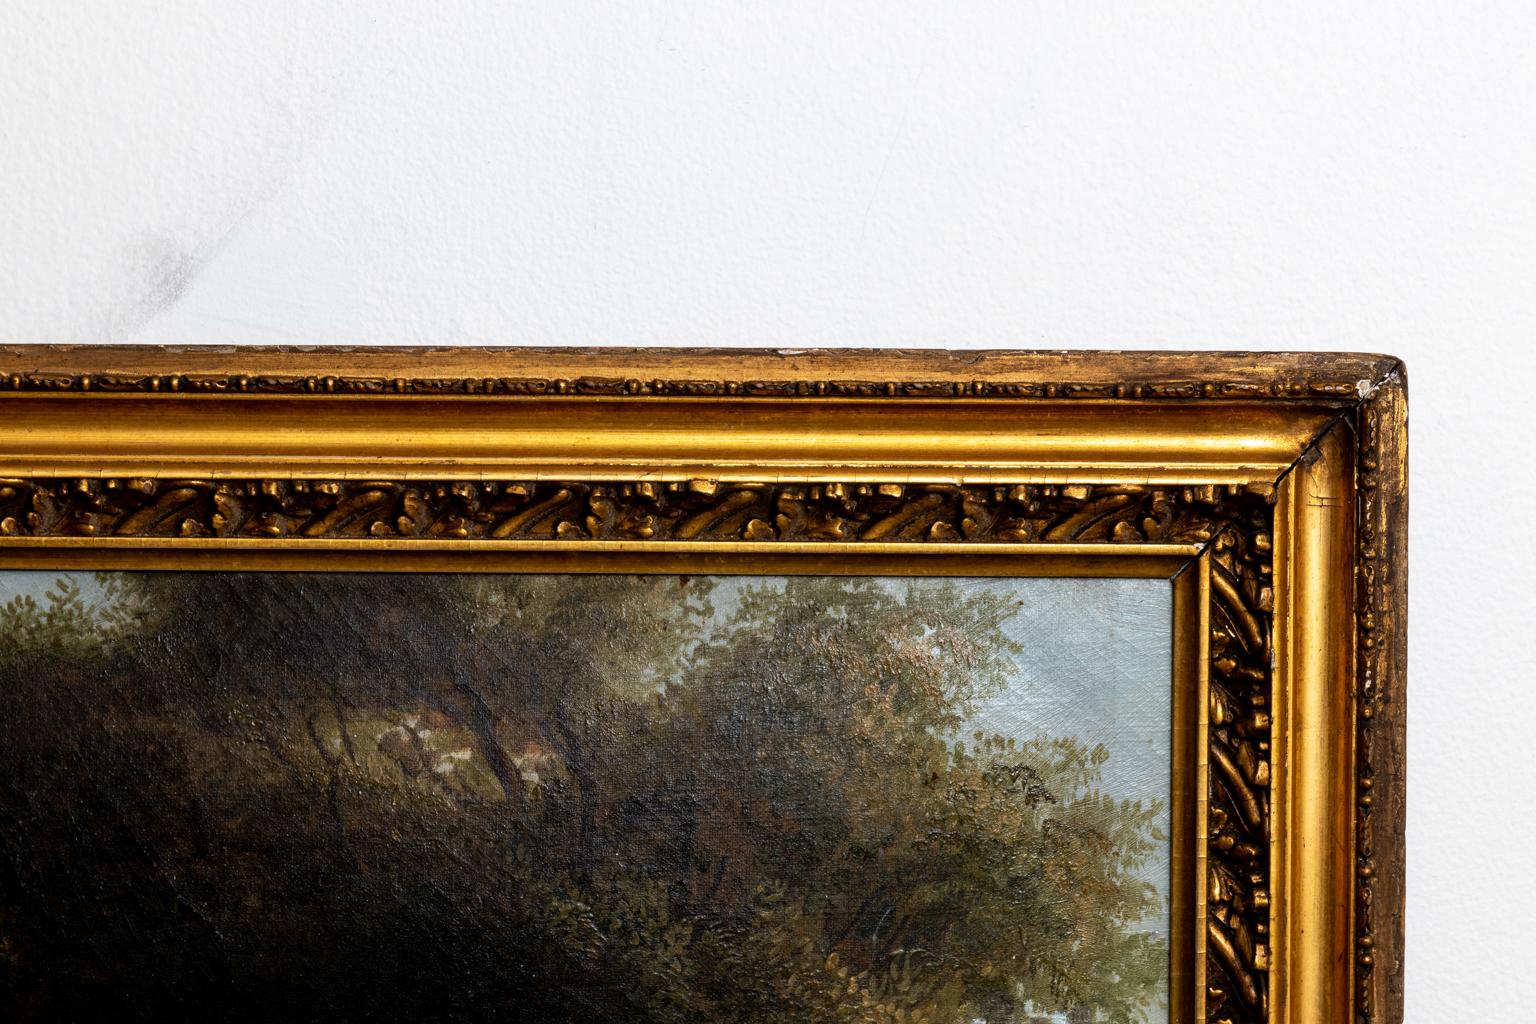 Circa 1840s large oil on canvas landscape with cows laid on a board with period giltwood frame. Made in either the United States or England. Please note of wear consistent with age including scattered minor inpainting.